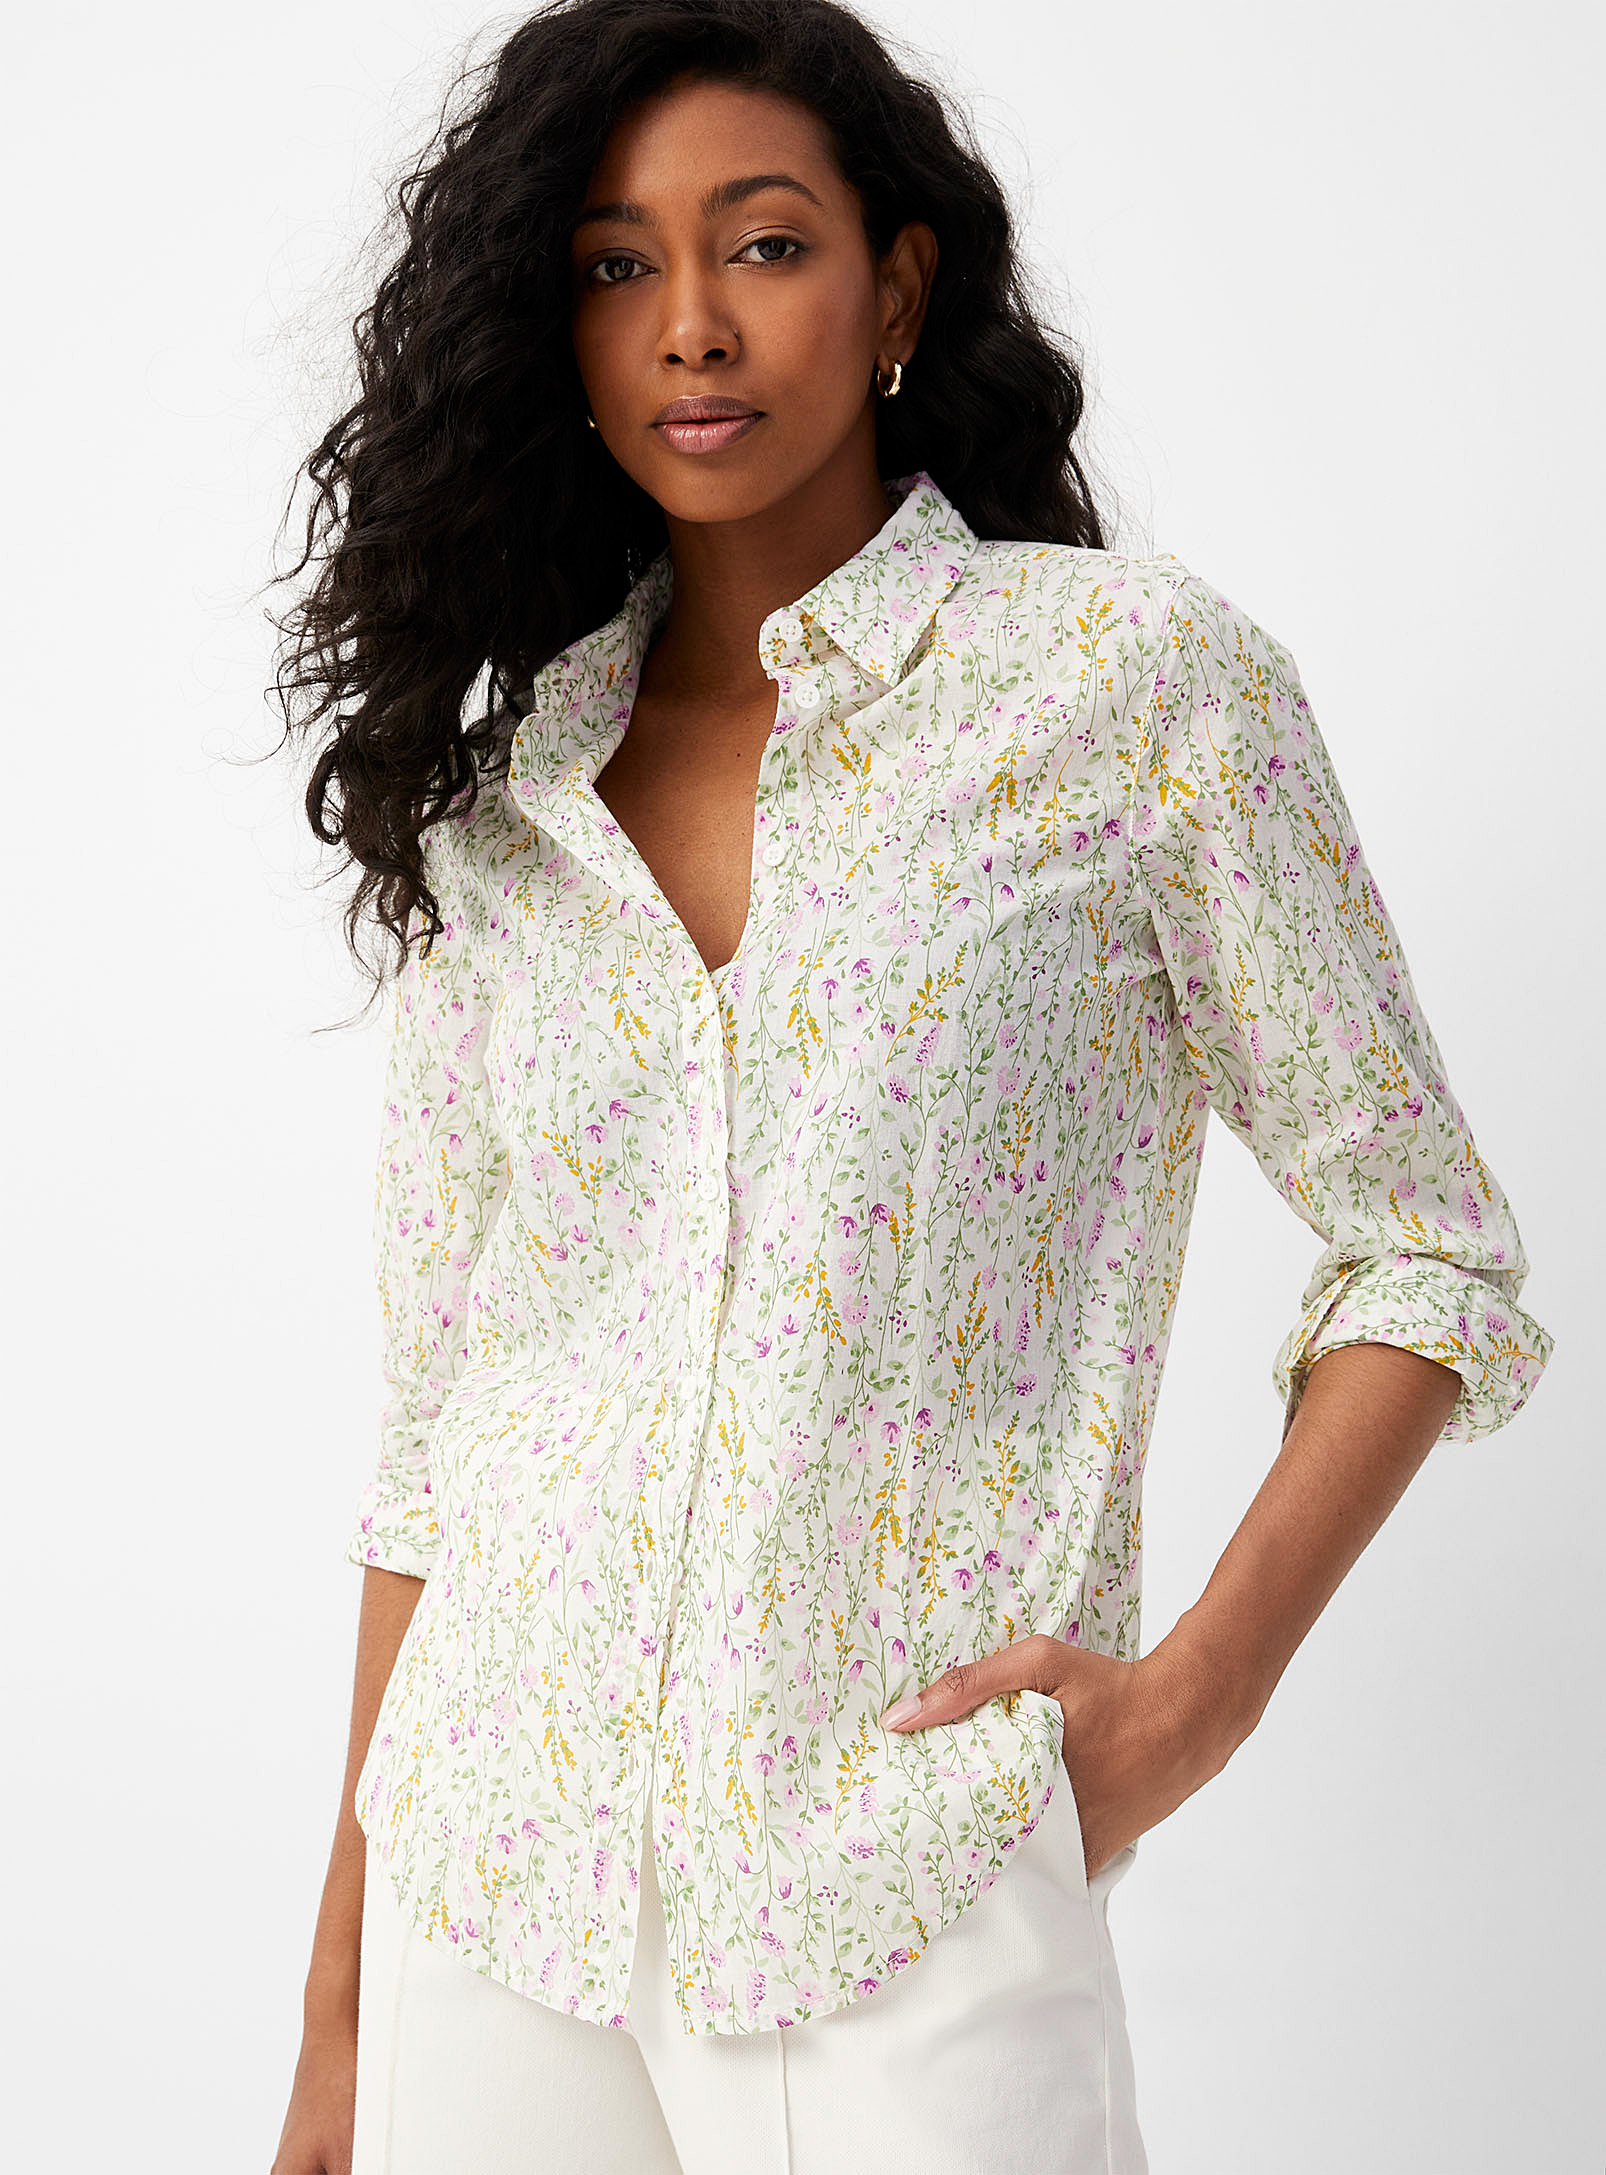 United Colors Of Benetton Vibrant Pattern Lightweight Shirt In Patterned White